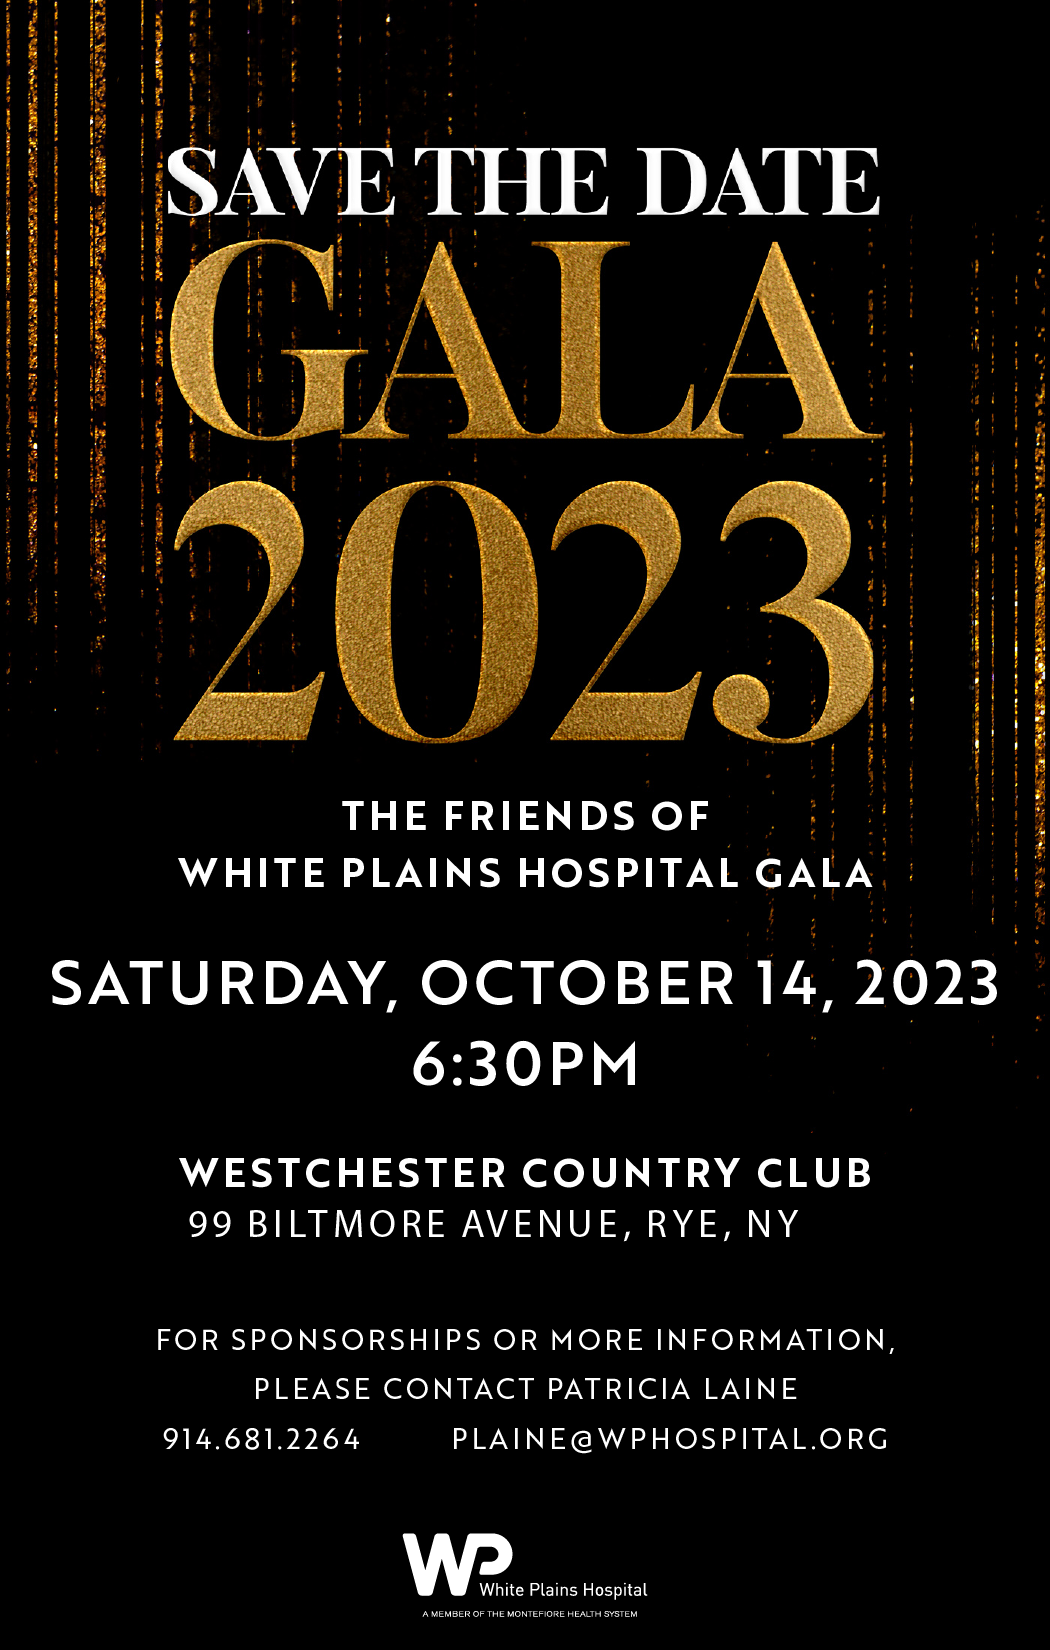 GALA 2023 SAVE THE DATE EMAIL BLAST With Logo